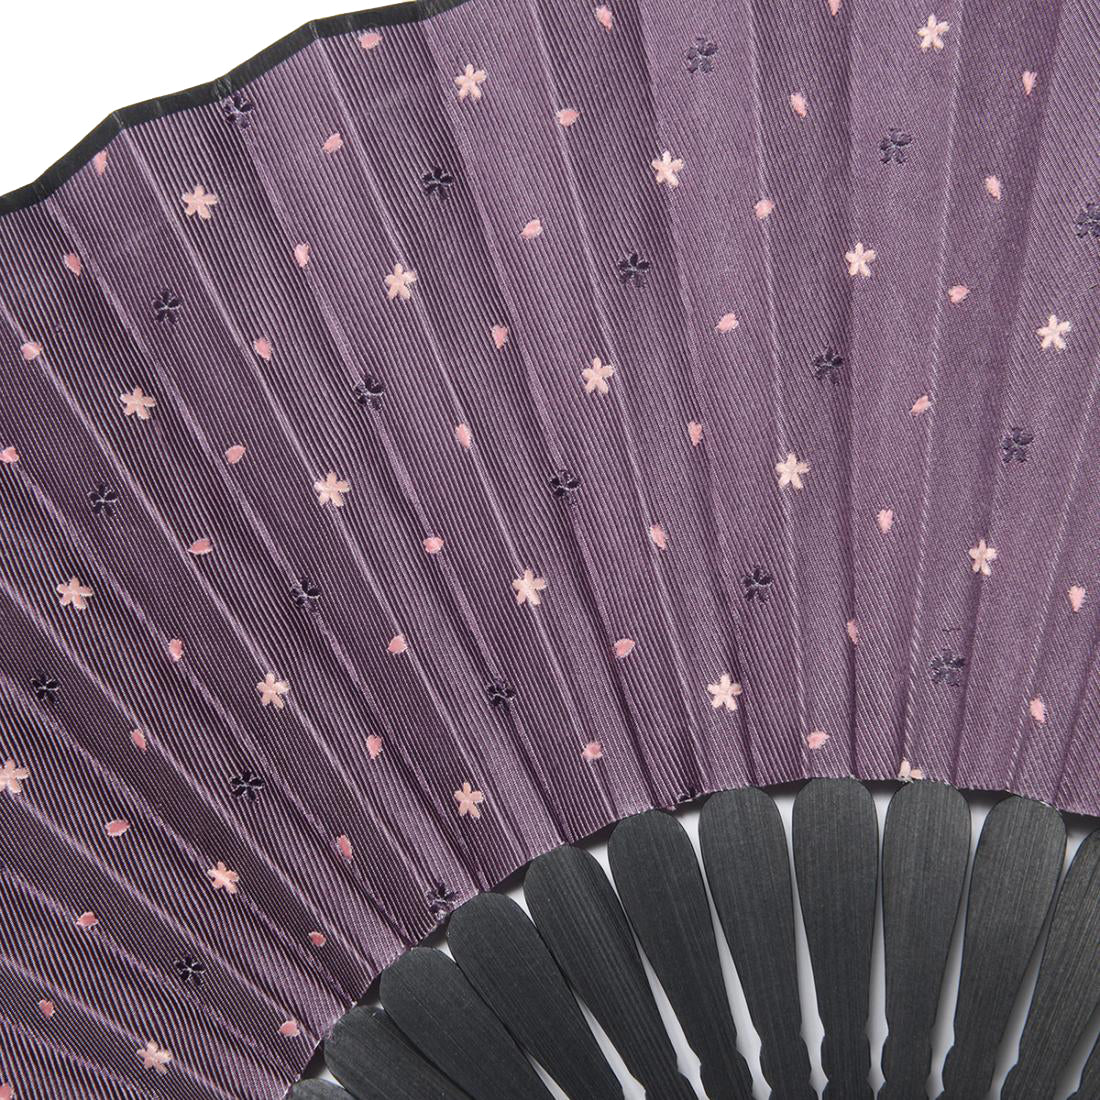 Hand Made Japanese Folding Fan -15.Sakura Cherry Blossoms Pattern with Silk & Bamboo Made in Japan FORTUNA Tokyo